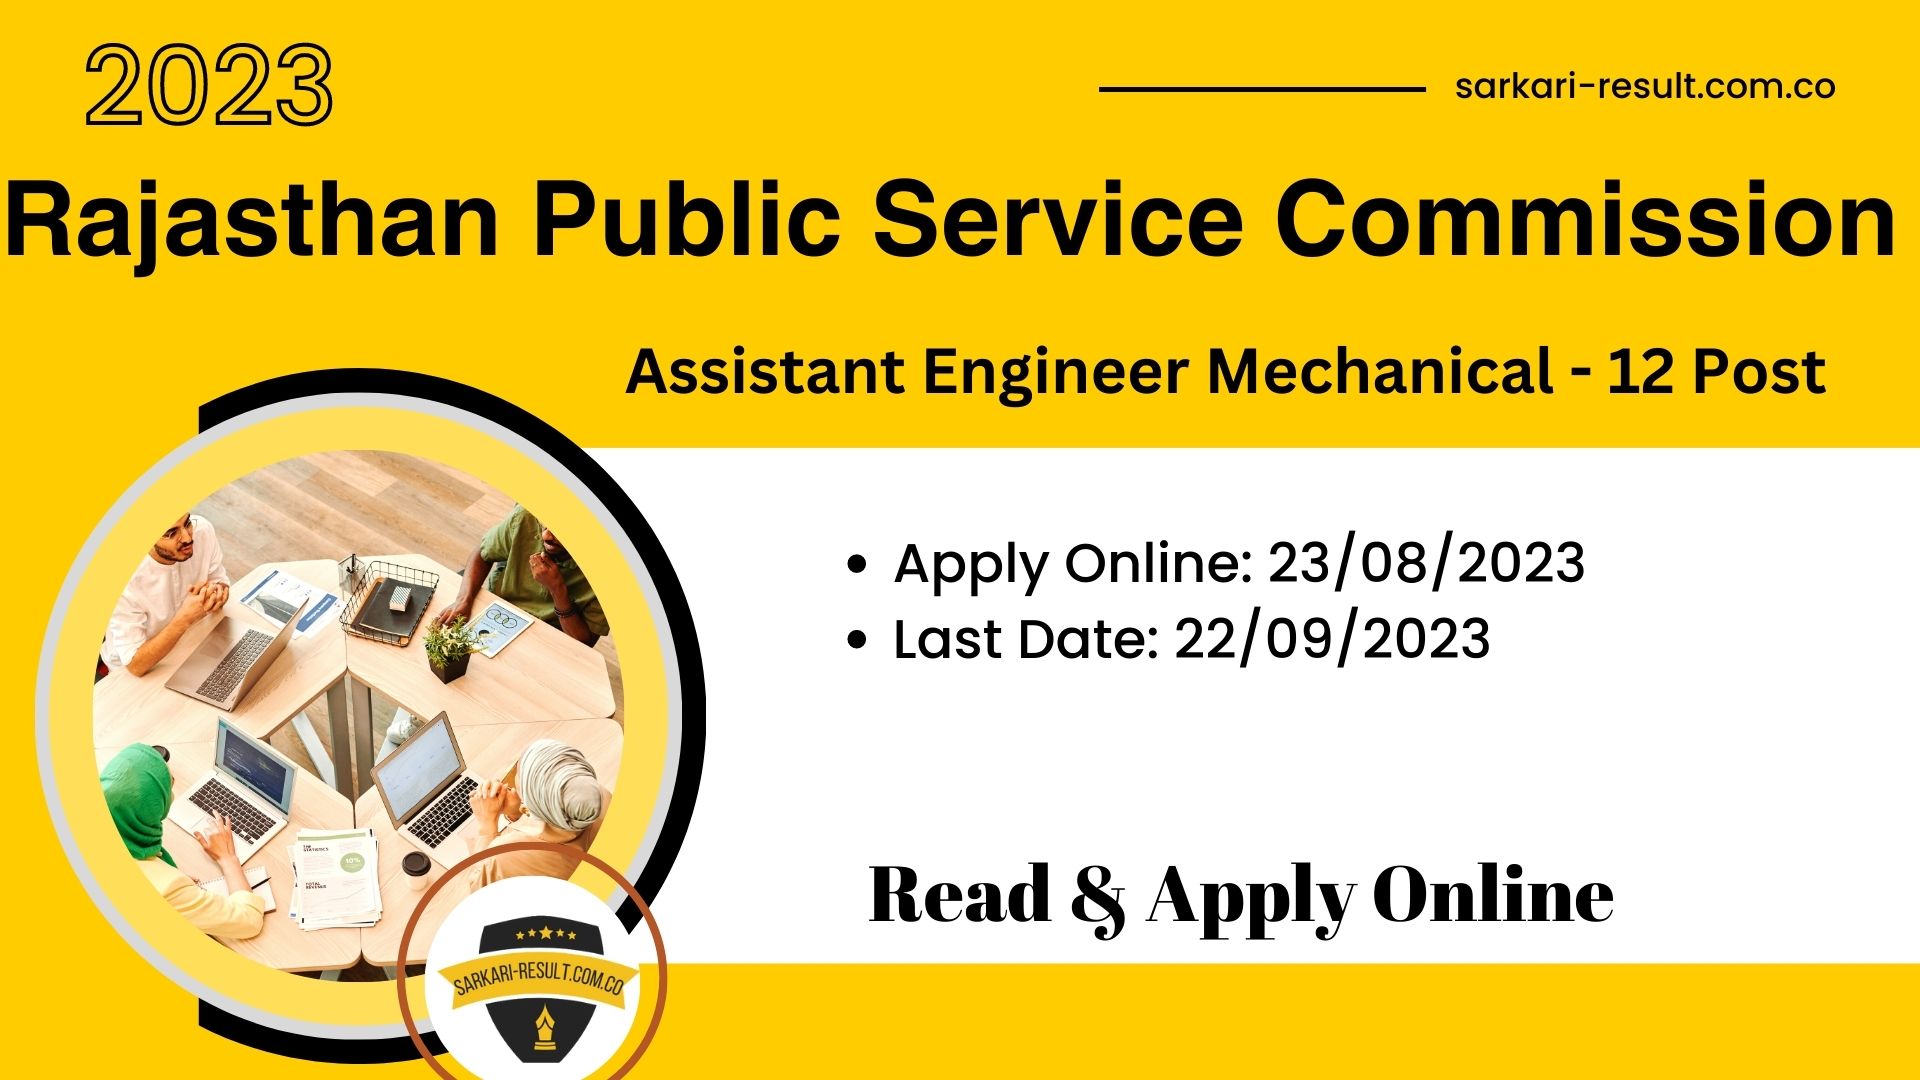 Rajasthan RPSC Assistant Engineer Mechanical Recruitment 2023 for 12 Post